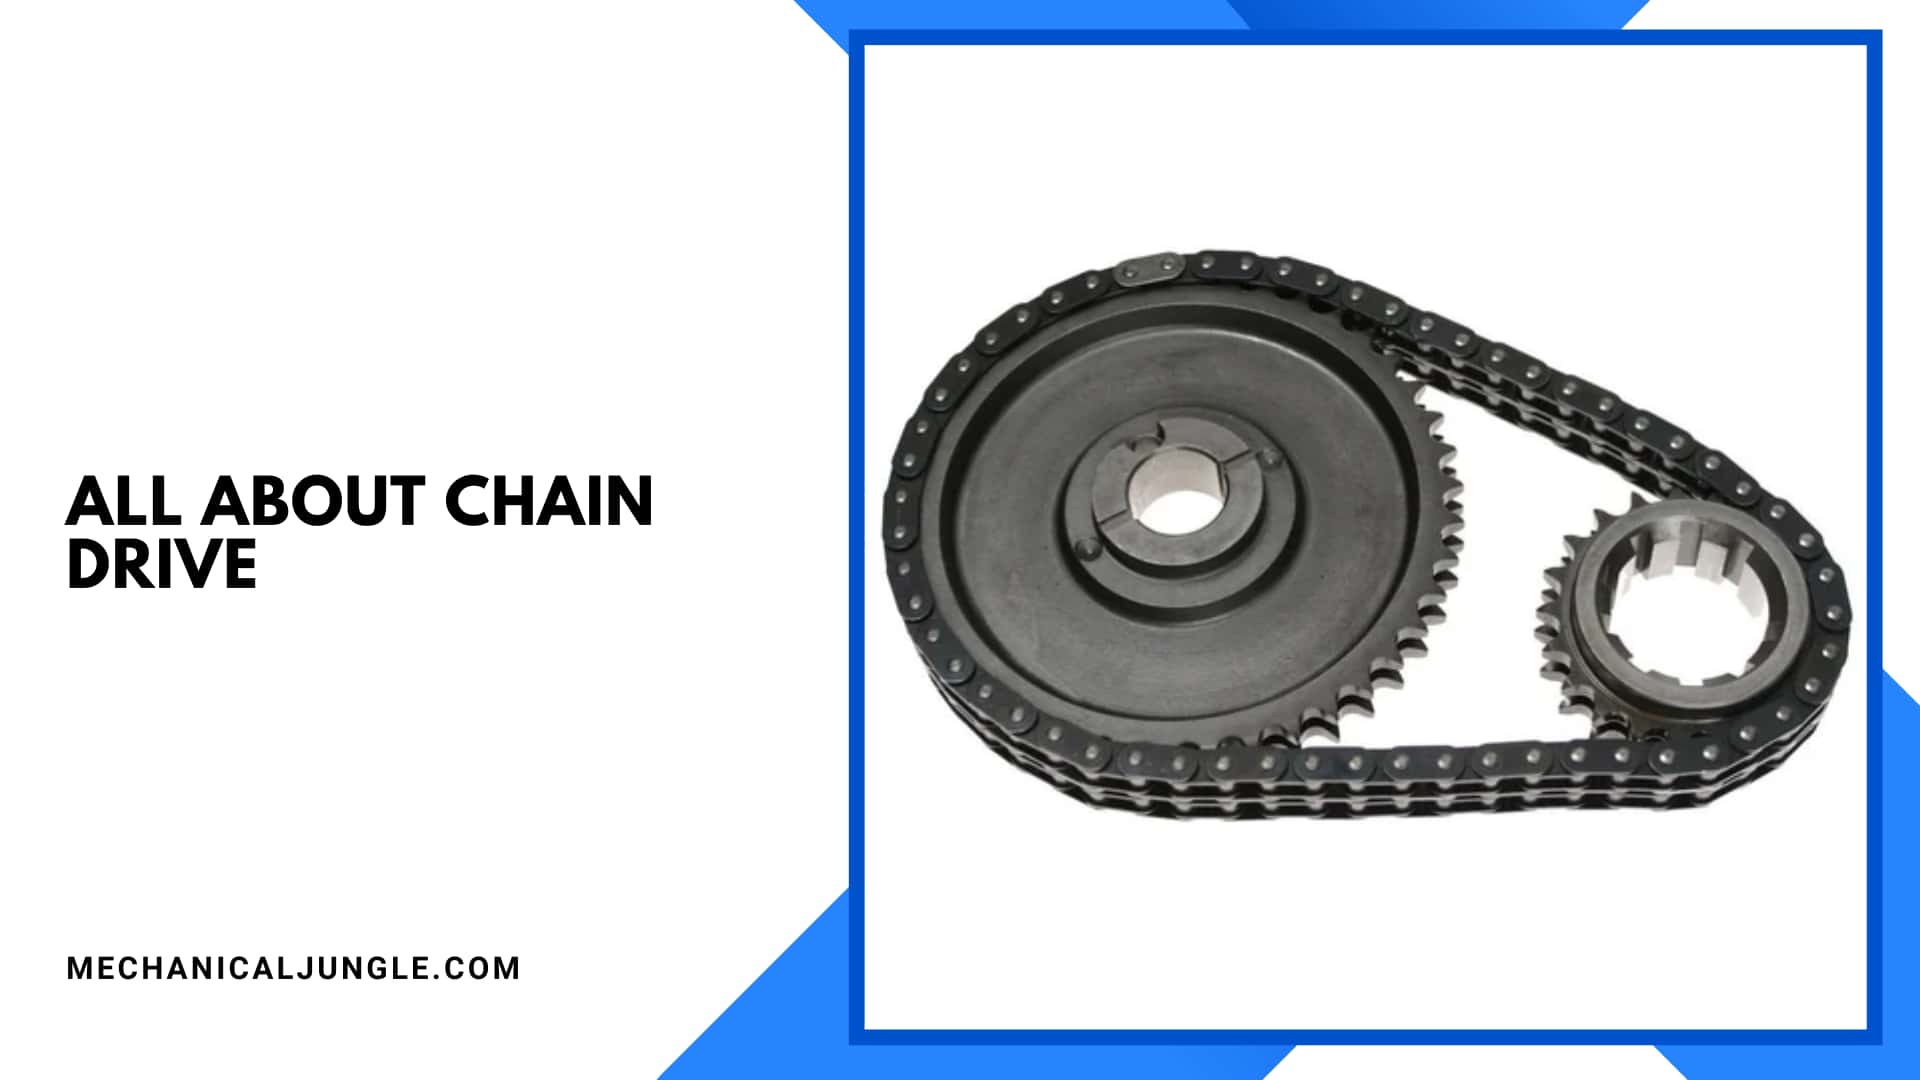 All About Chain Drive